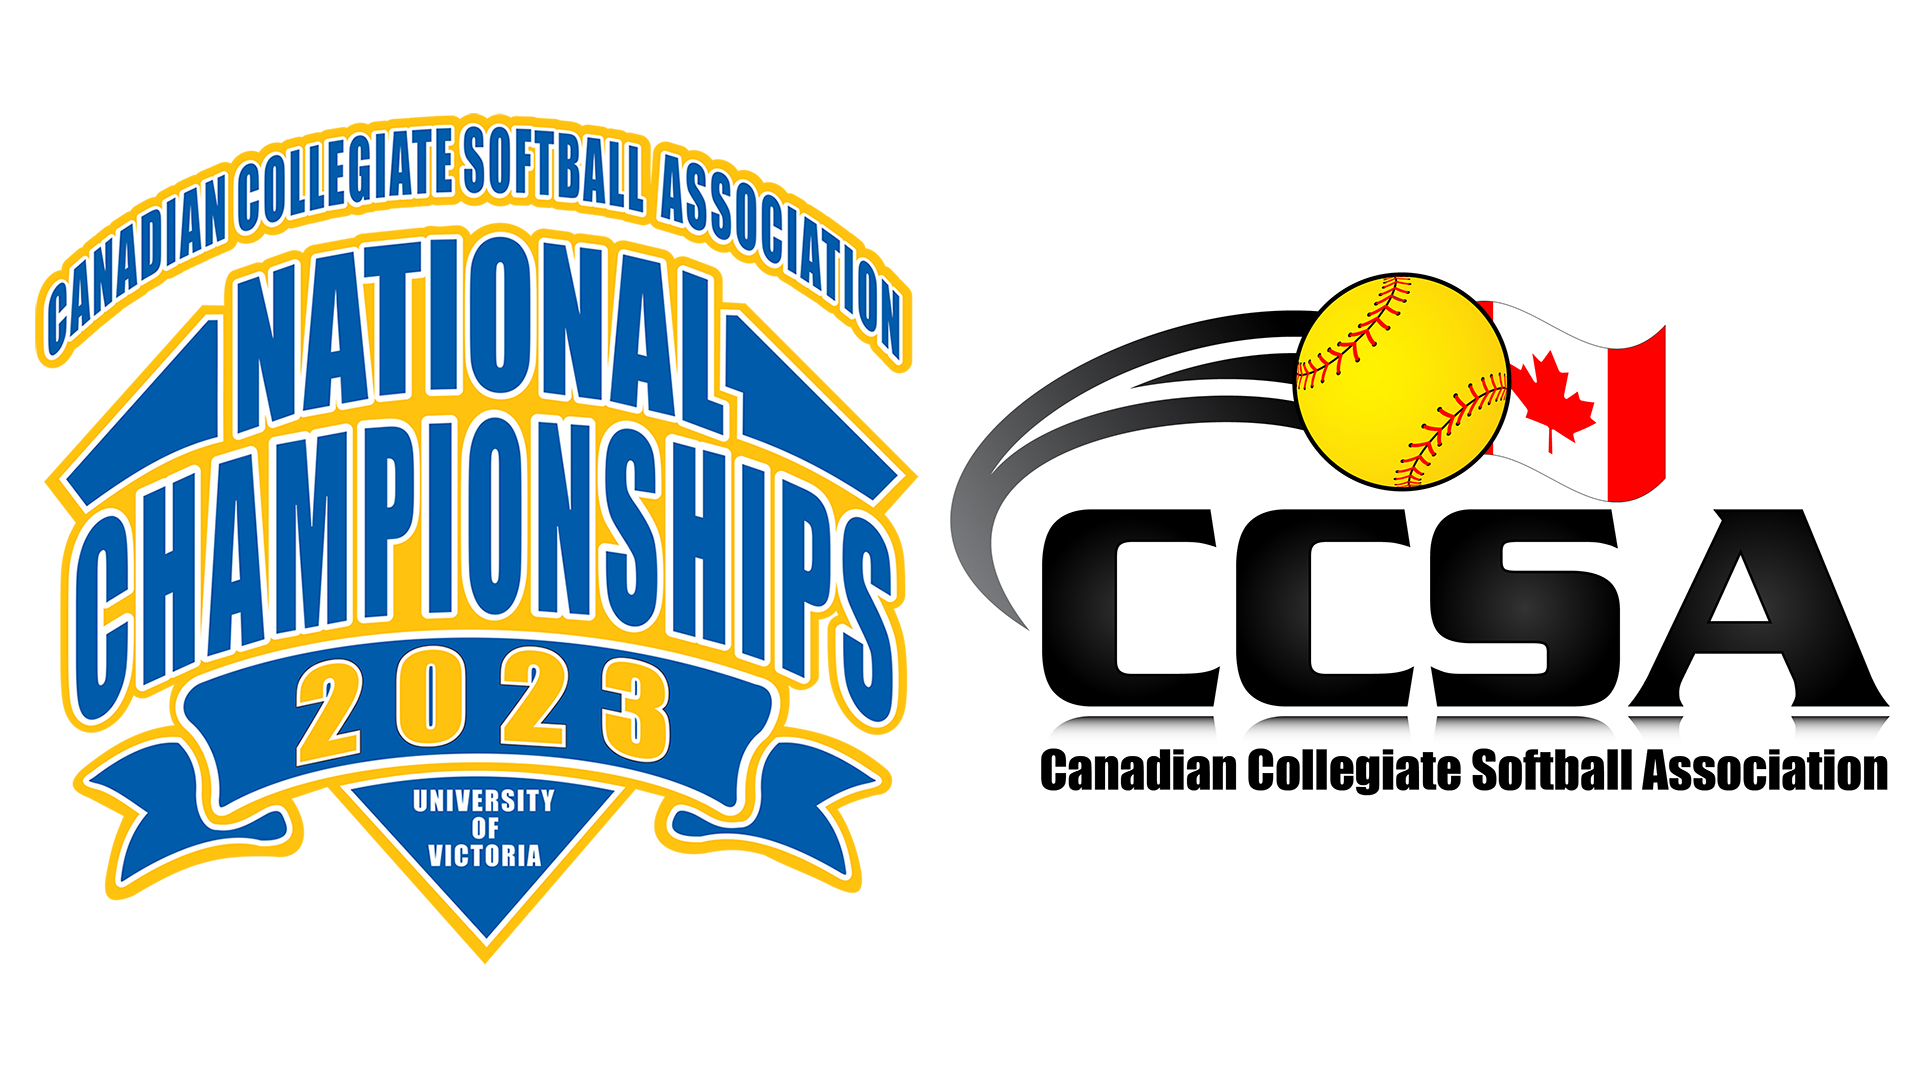 Women's Softball in Victoria to Defend CCSA National Championship